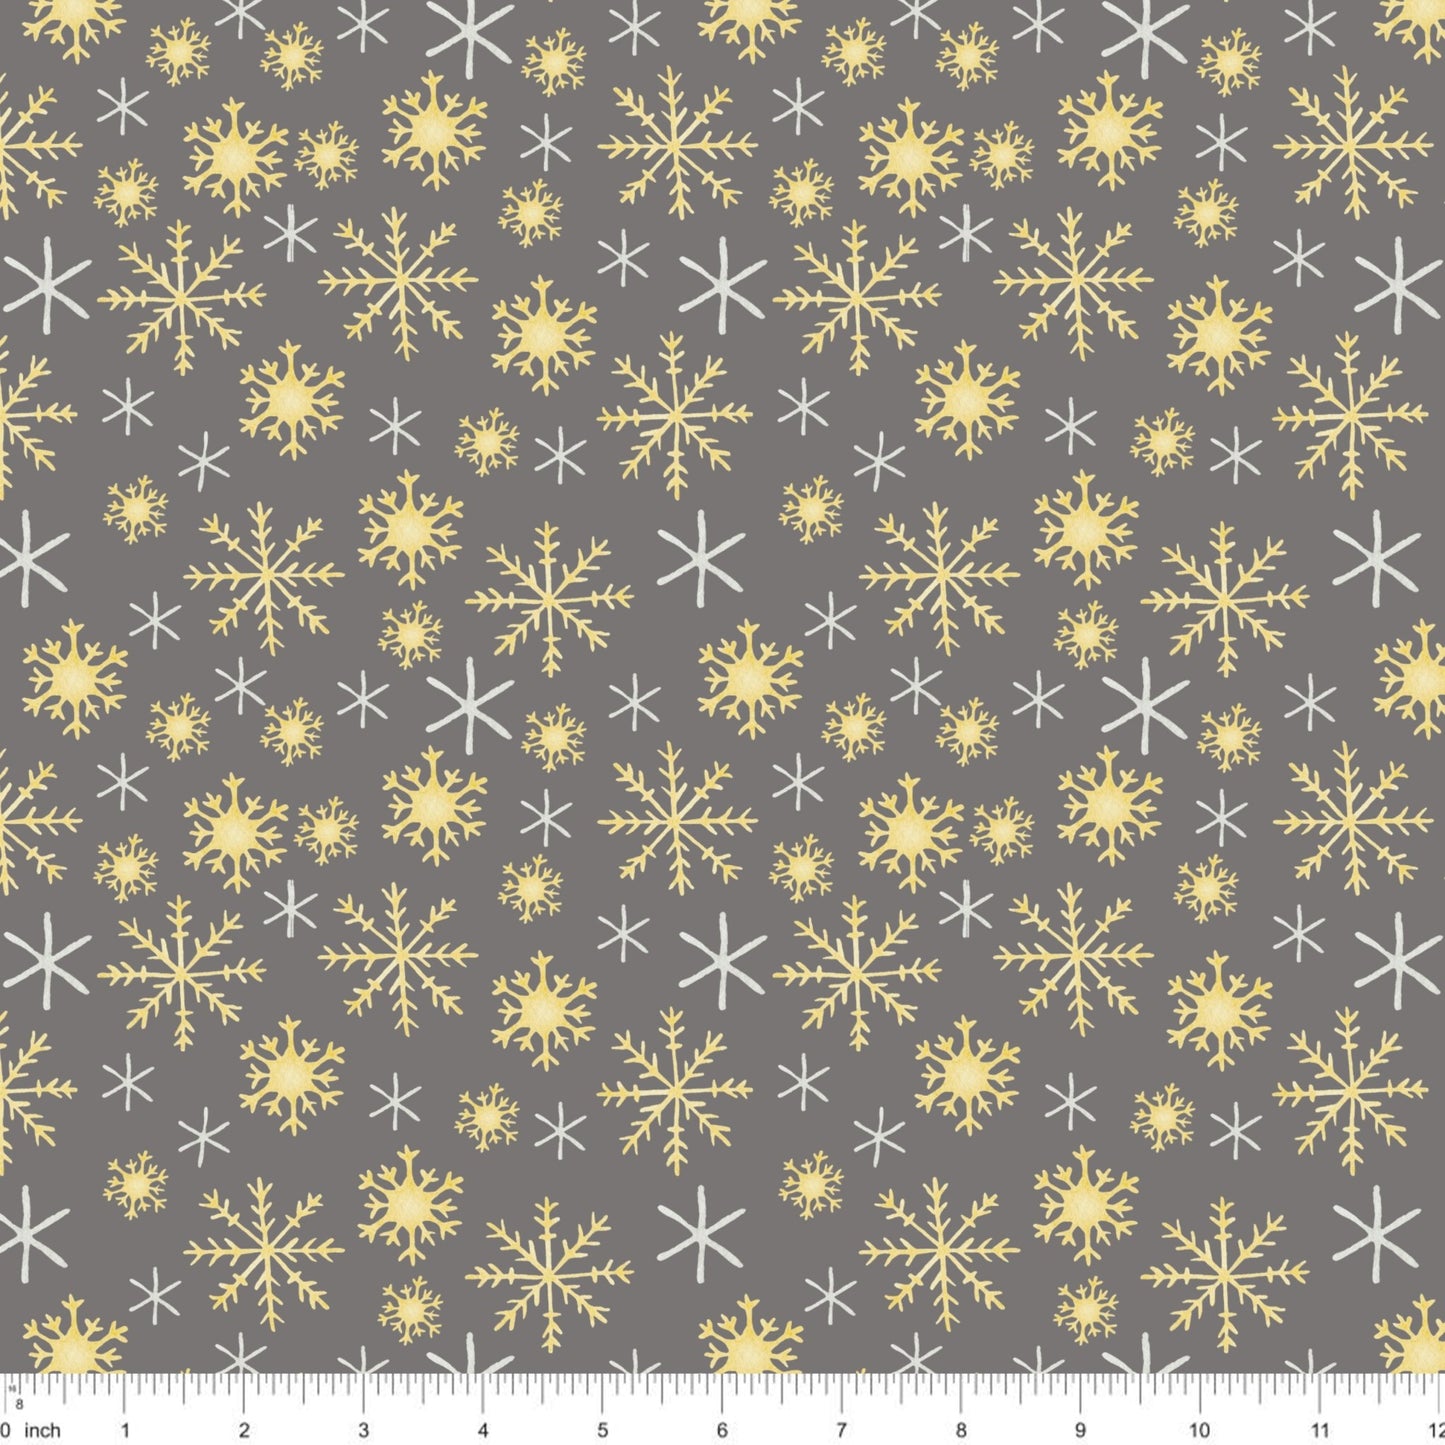 Snowflakes Gold - Dark - Winter Owl Coordinate - Little Rhody Sewing Co.